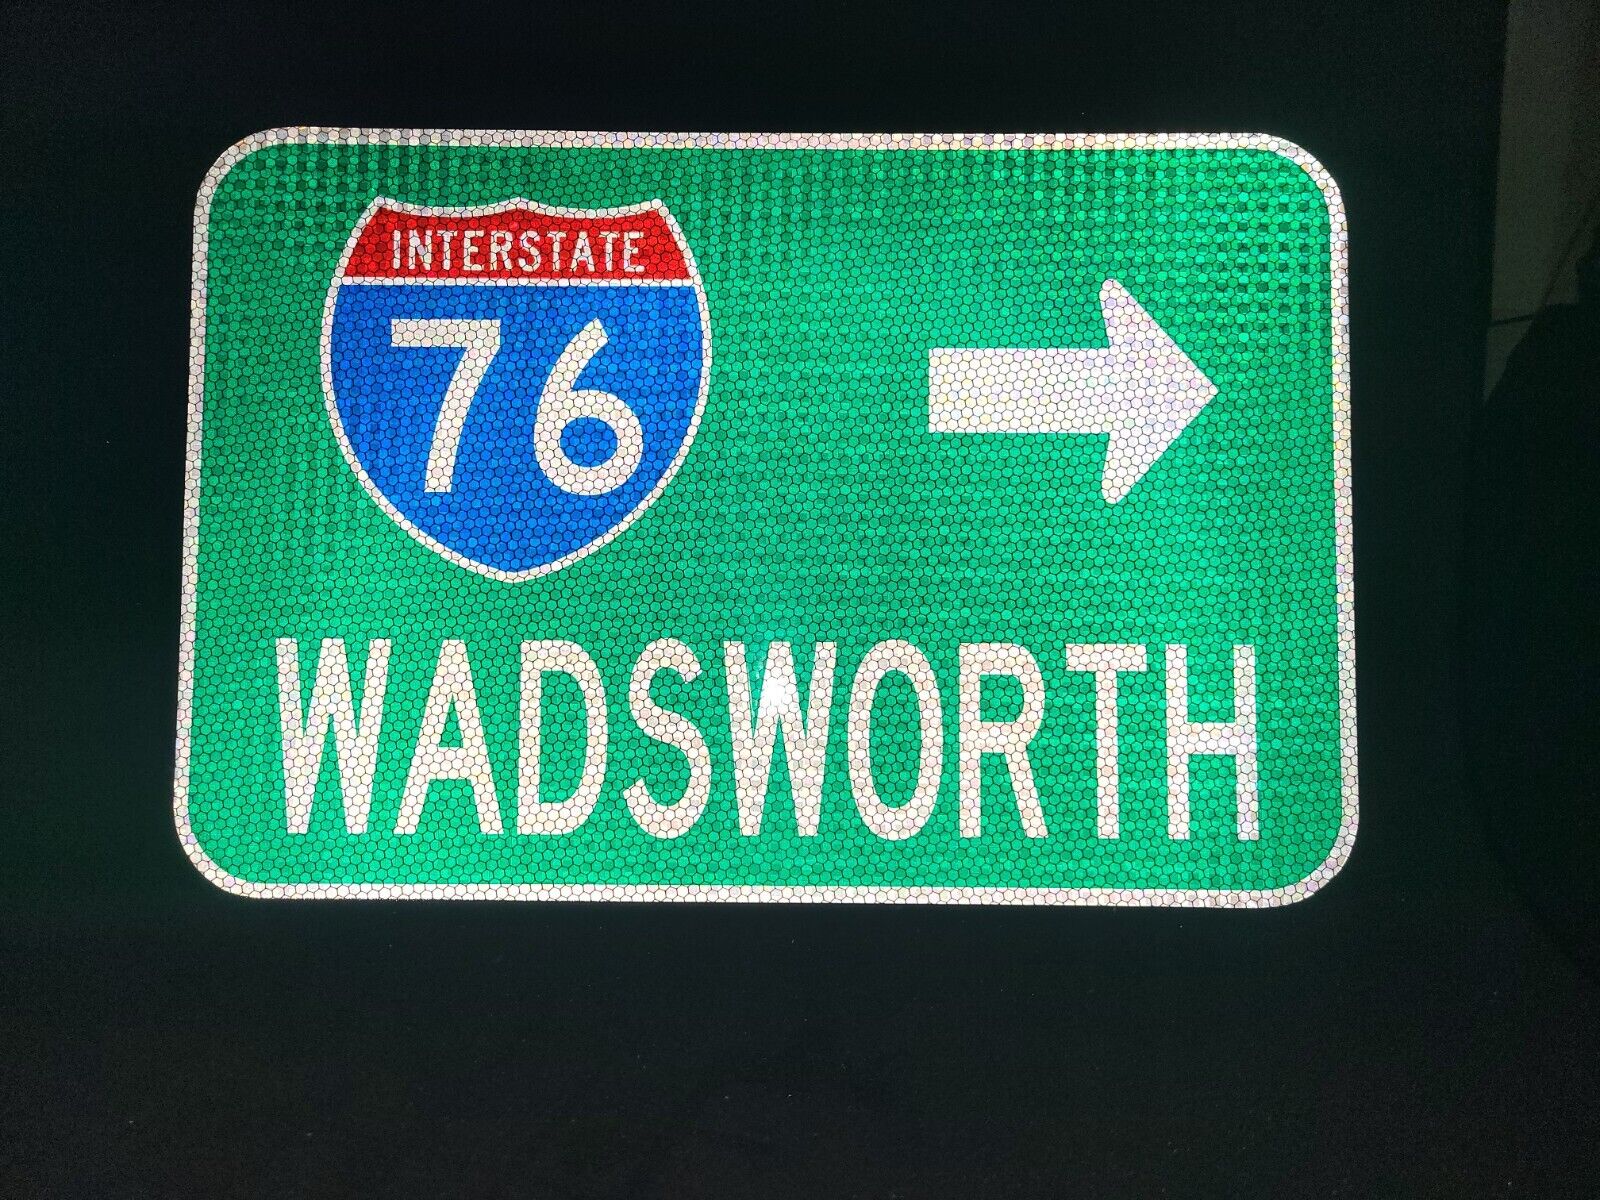 WADSWORTH Interstate 76 OHIO route road sign 18\